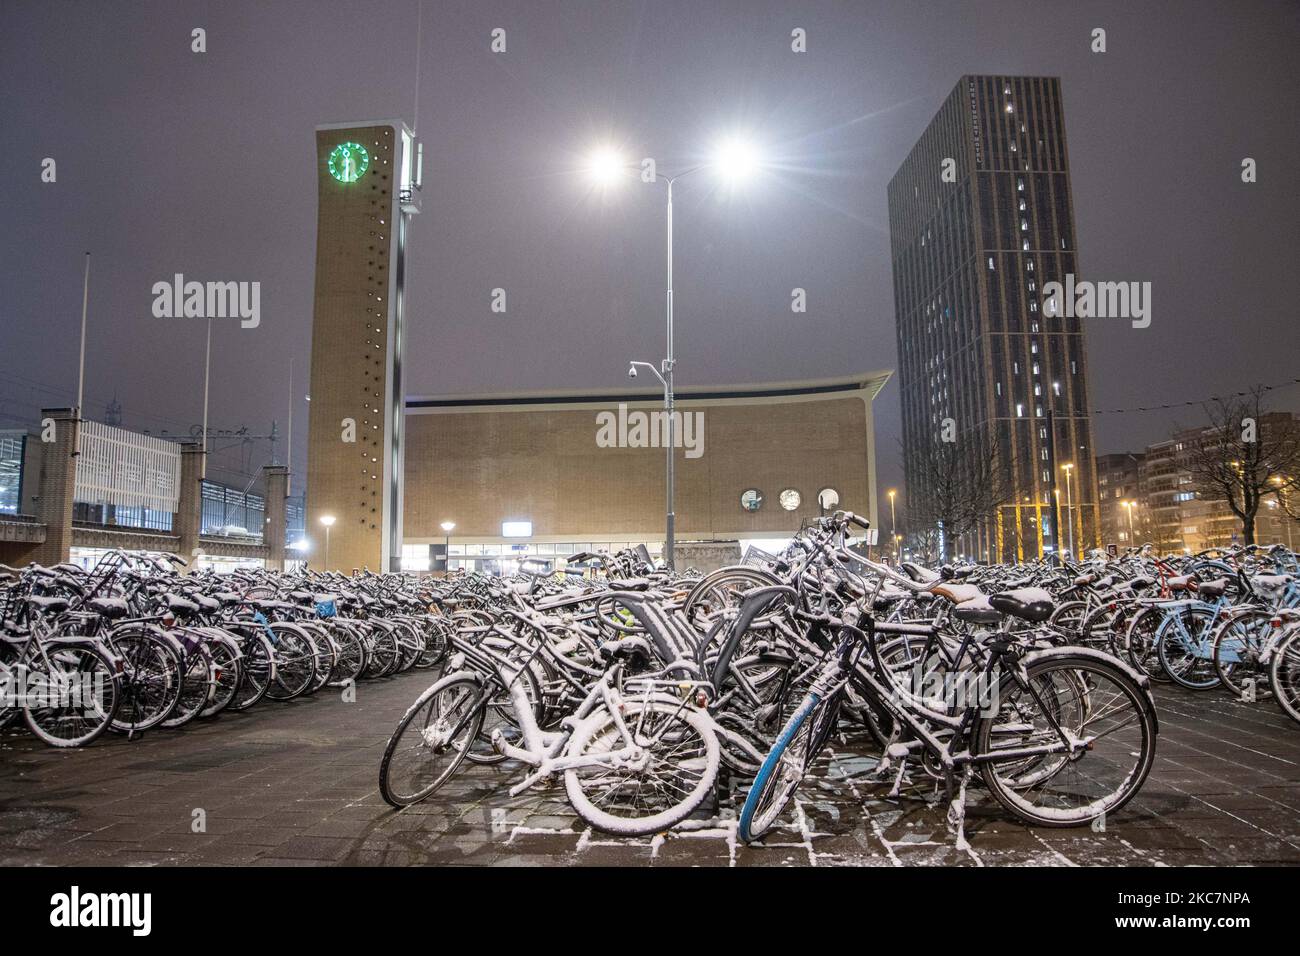 Thousands of bicycles covered by snow as seen parked near the train station. Night long exposure photography images of snow-covered and illuminated with city lights Eindhoven city center after the snowfall. Daily life in the Netherlands with the first snowfall of the year covering almost everything the cold weather shows subzero temperature. The chilly condition with snow and ice changed soon according to the forecast, the freezing condition will not last more than a day. Eindhoven, the Netherlands on January 16, 2020 (Photo by Nicolas Economou/NurPhoto) Stock Photo